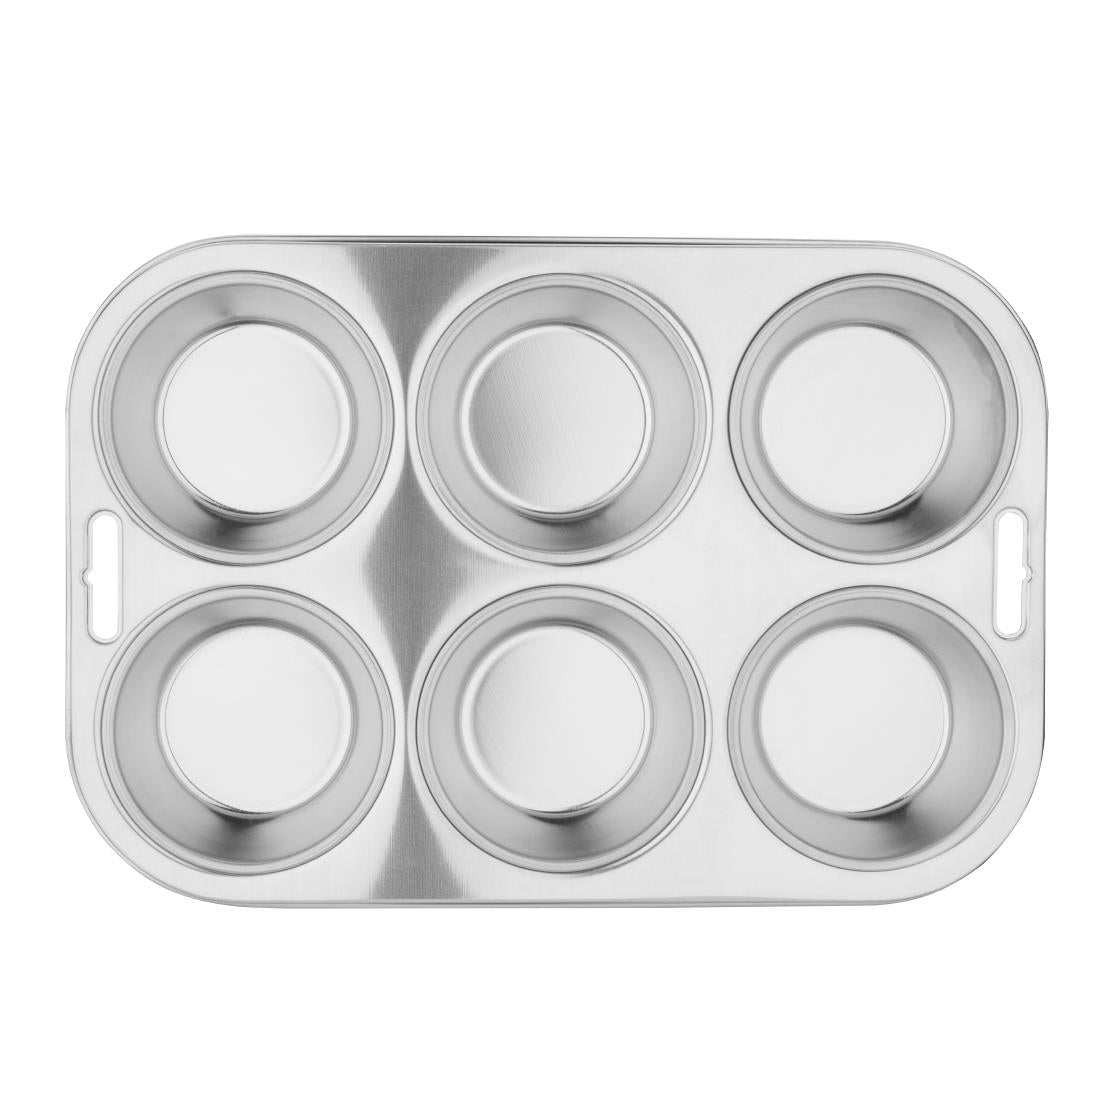 E714 Vogue Stainless Steel Deep Muffin Tray 6 Cup JD Catering Equipment Solutions Ltd